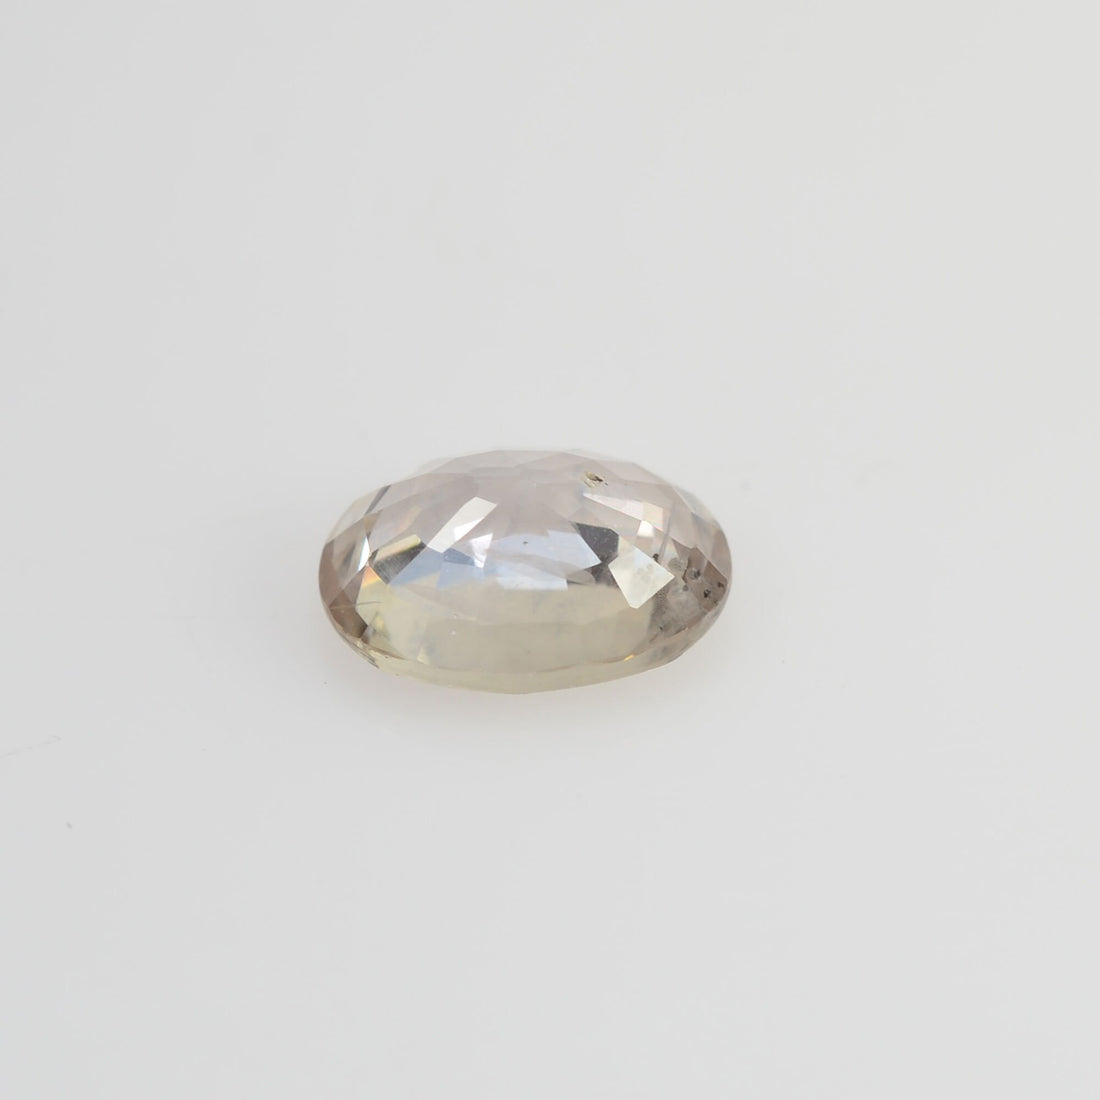 1.05 cts Natural Yellow Sapphire Loose Gemstone Oval Cut